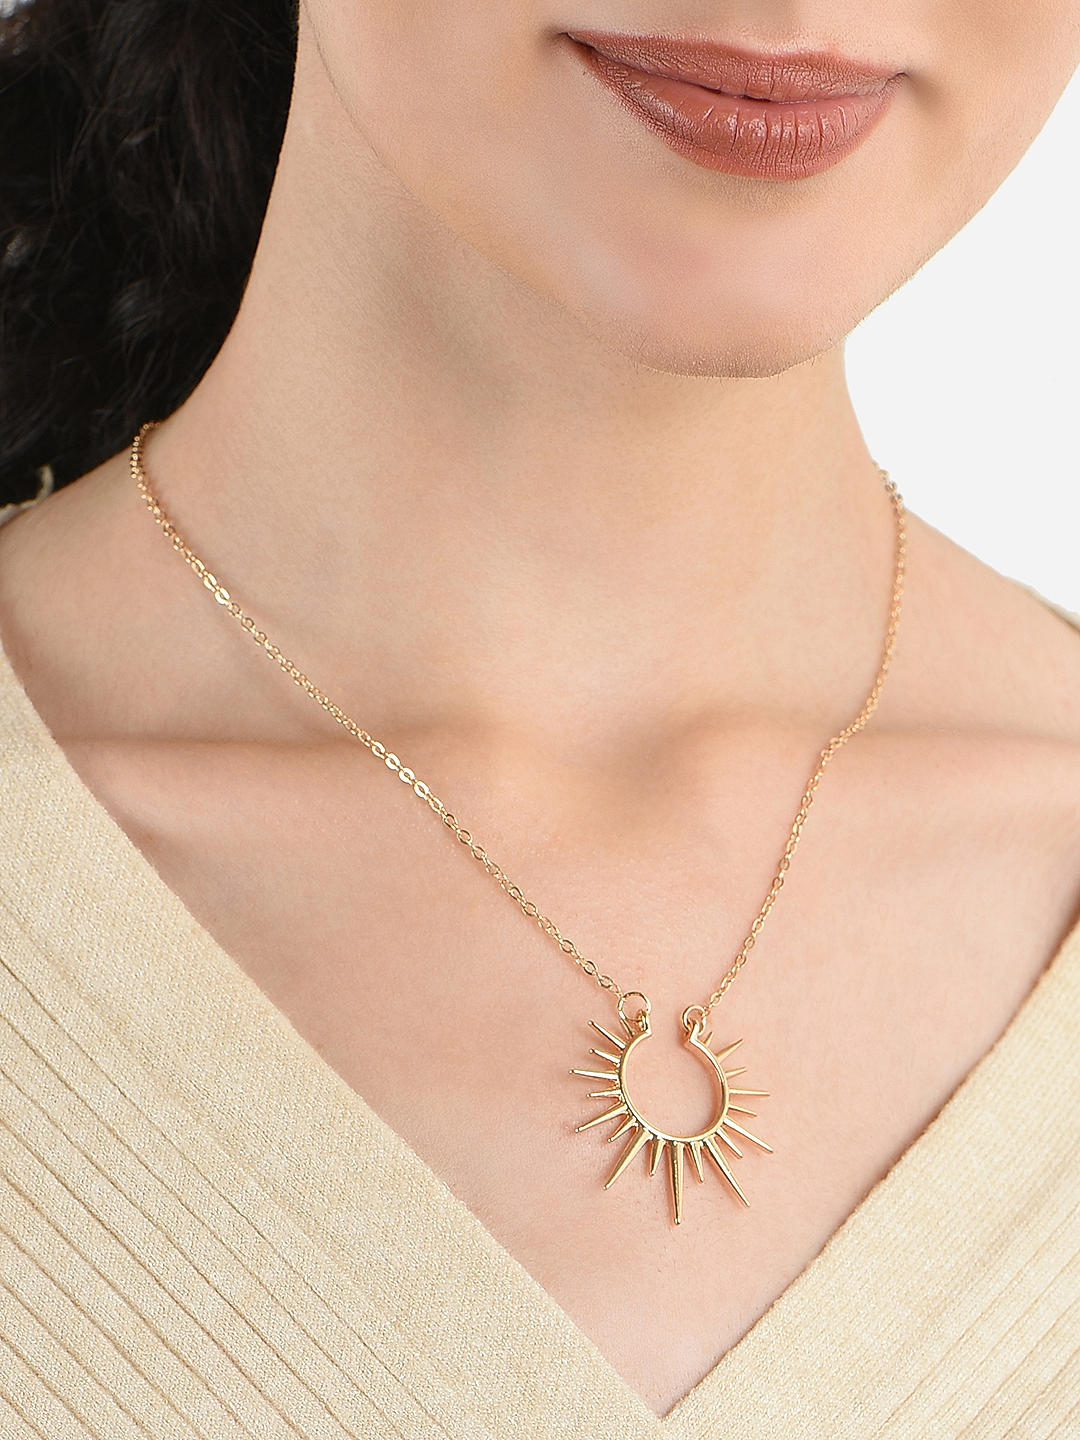 Buy Gold Sun Face and Moon Pendant Necklace, Sun and Moon Coin Necklace,  Bridesmaid Gift, Birthday Gift,layered Necklace, Coin Necklace Online in  India - Etsy